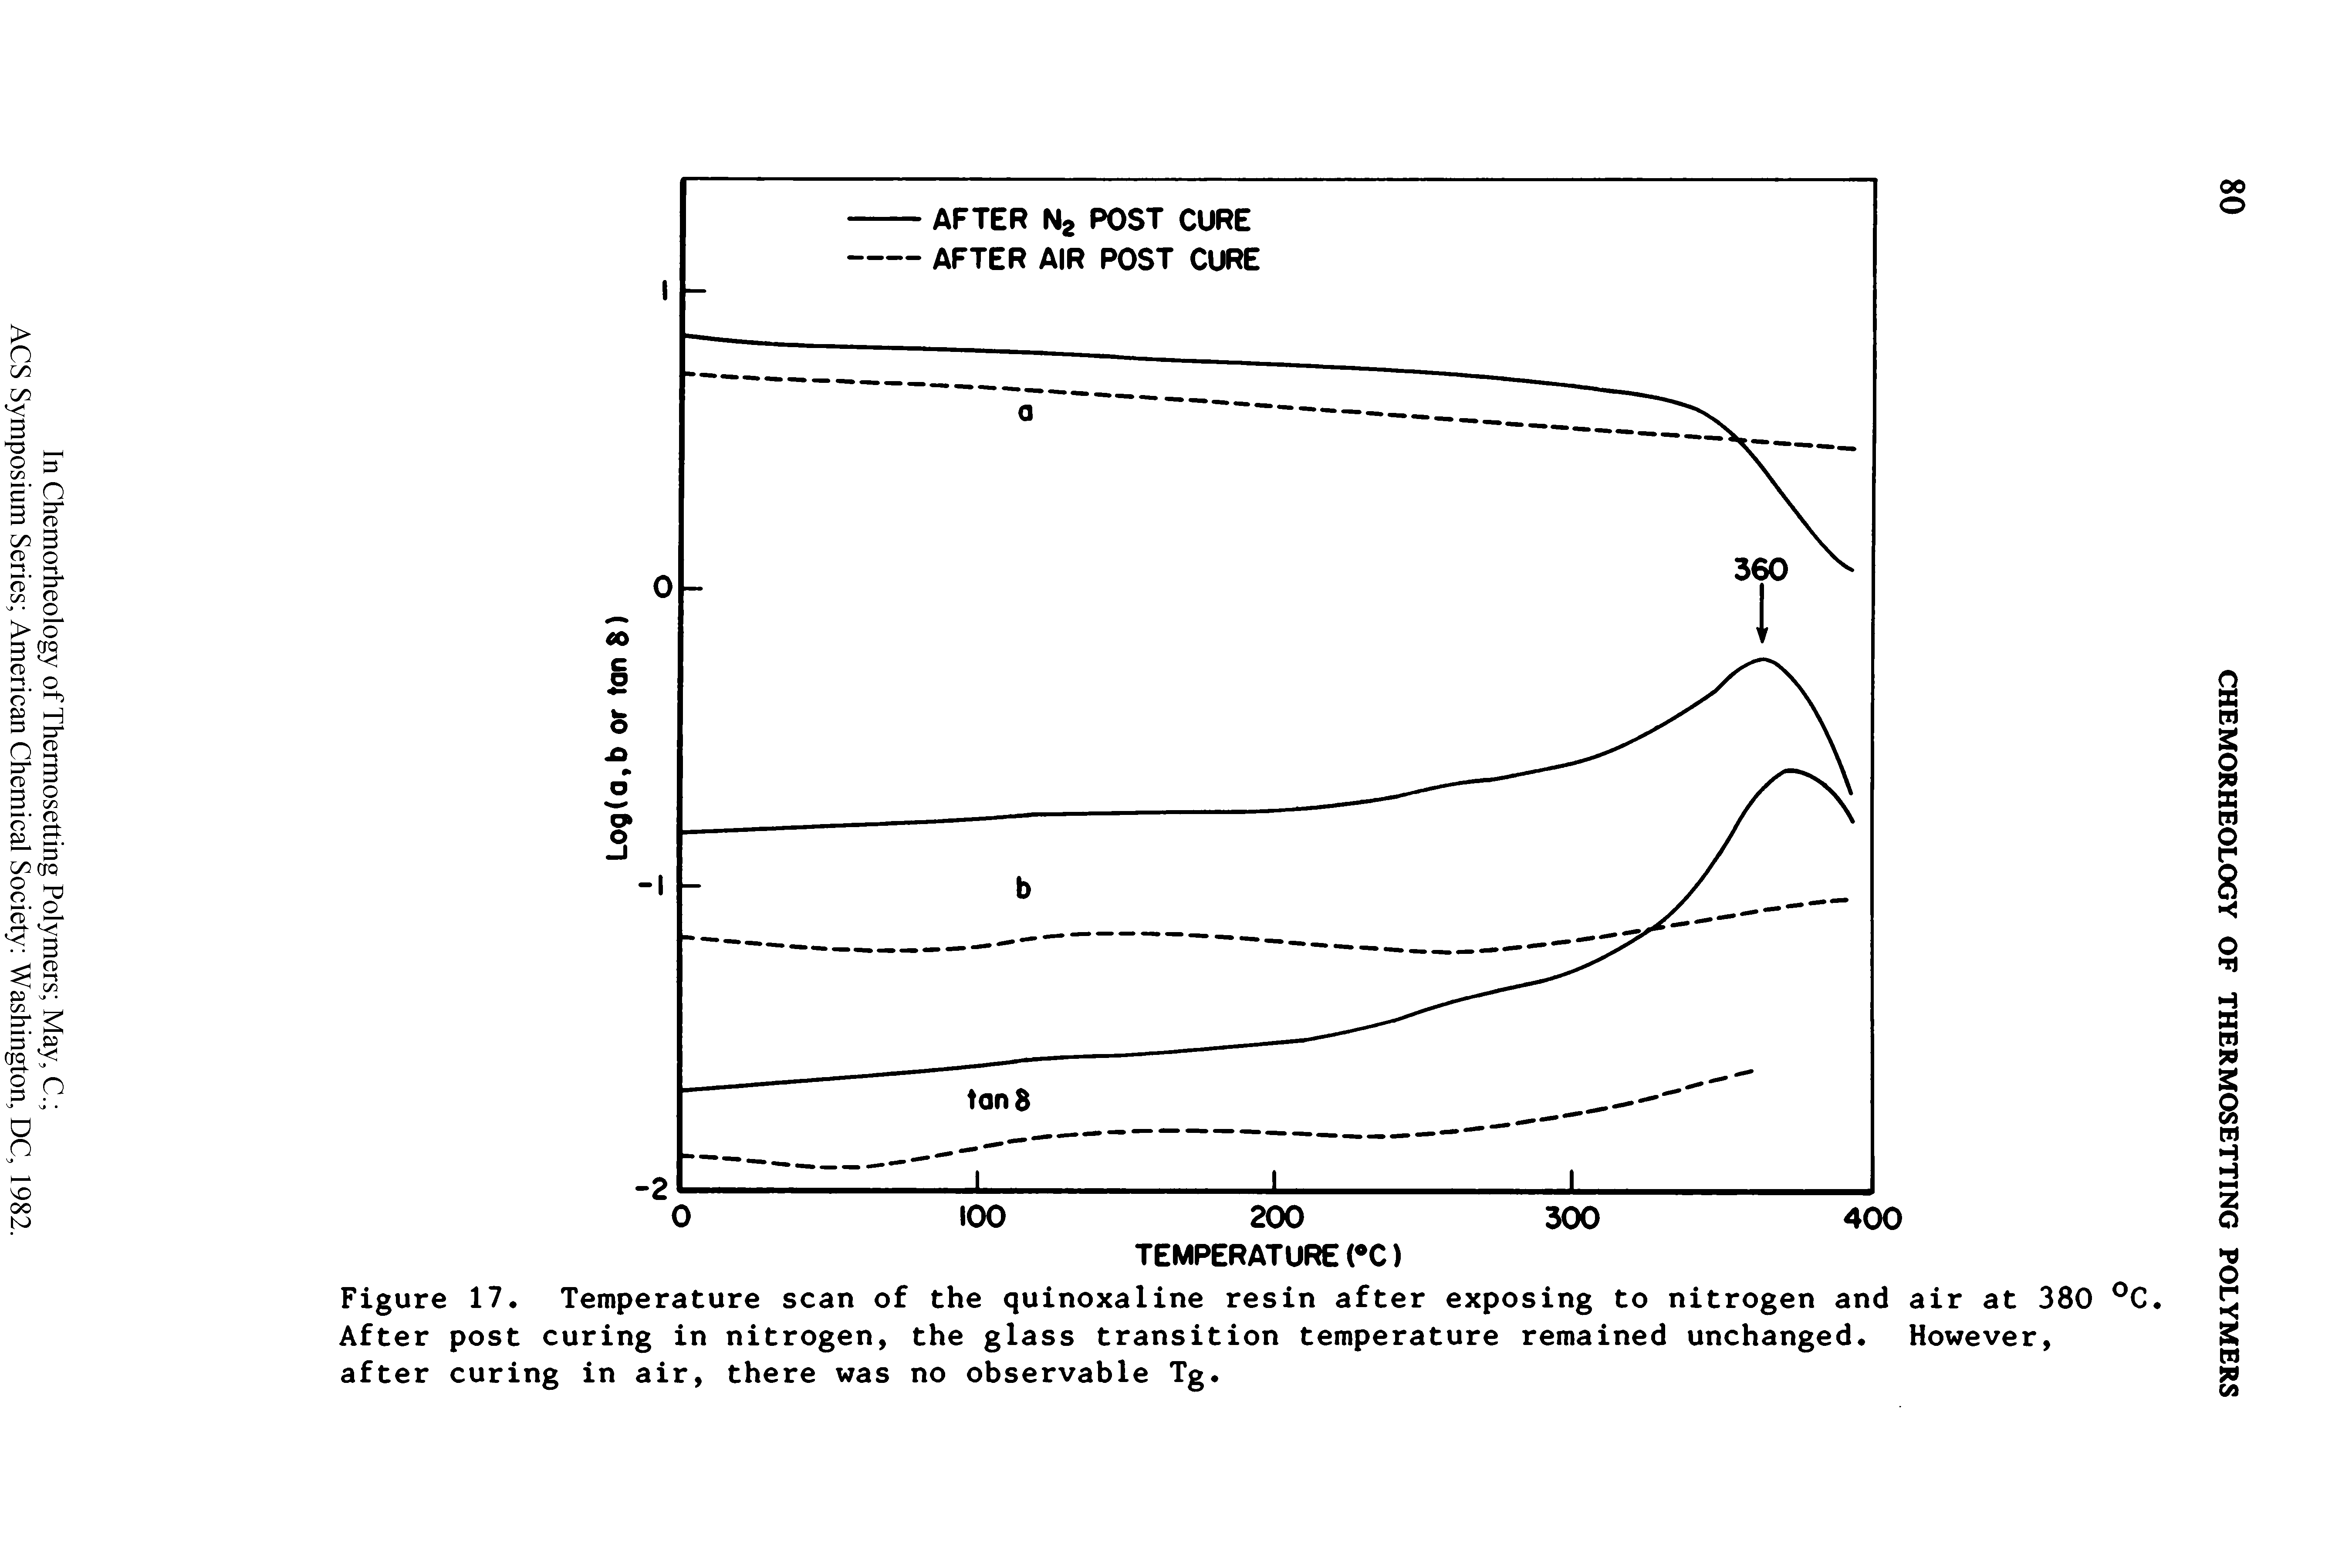 Figure 17. Temperature scan of the quinoxaline resin after exposing to nitrogen and air at 380 C. After post curing in nitrogen, the glass transition temperature remained unchanged. However, after curing in air, there was no observable Tg.